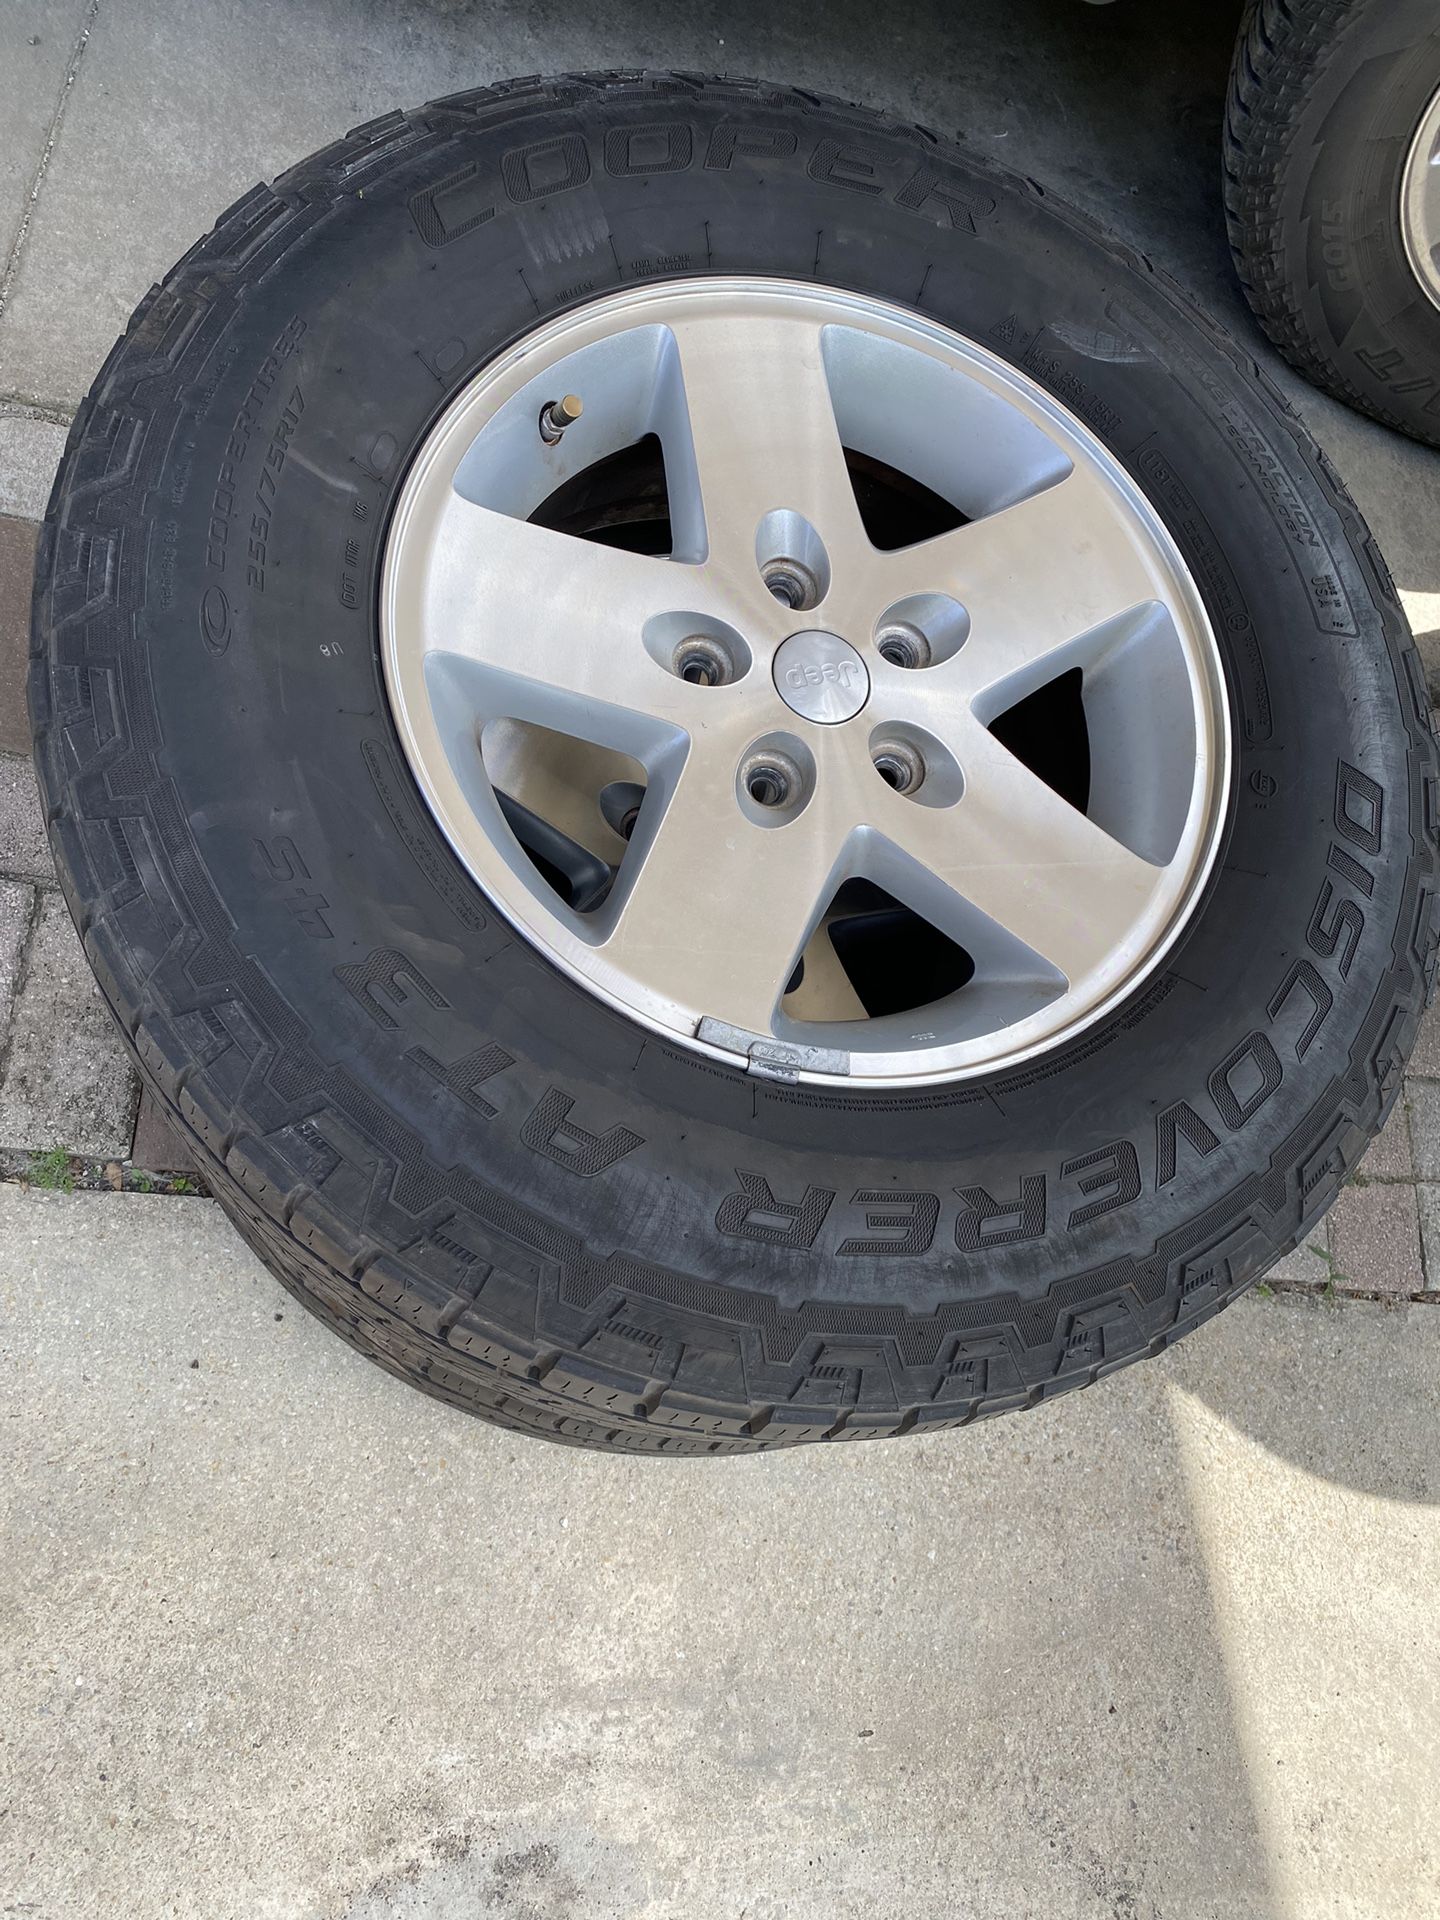 5 Tires With Rim For Jeep Wrangler